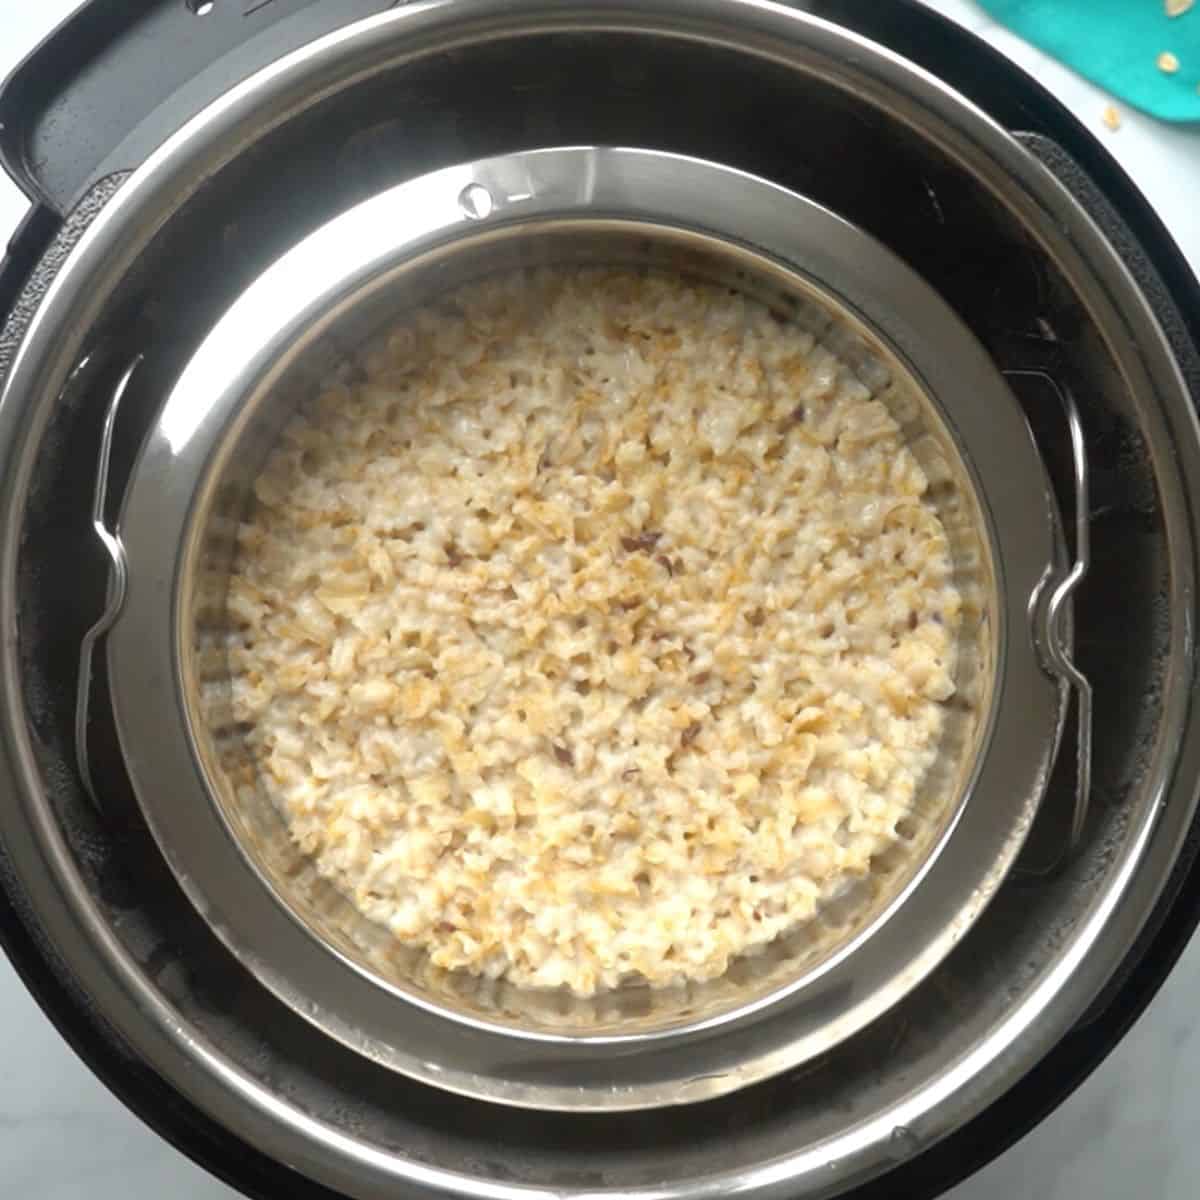 Cooked oatmeal inside stainless steel pot inside Instant Pot.